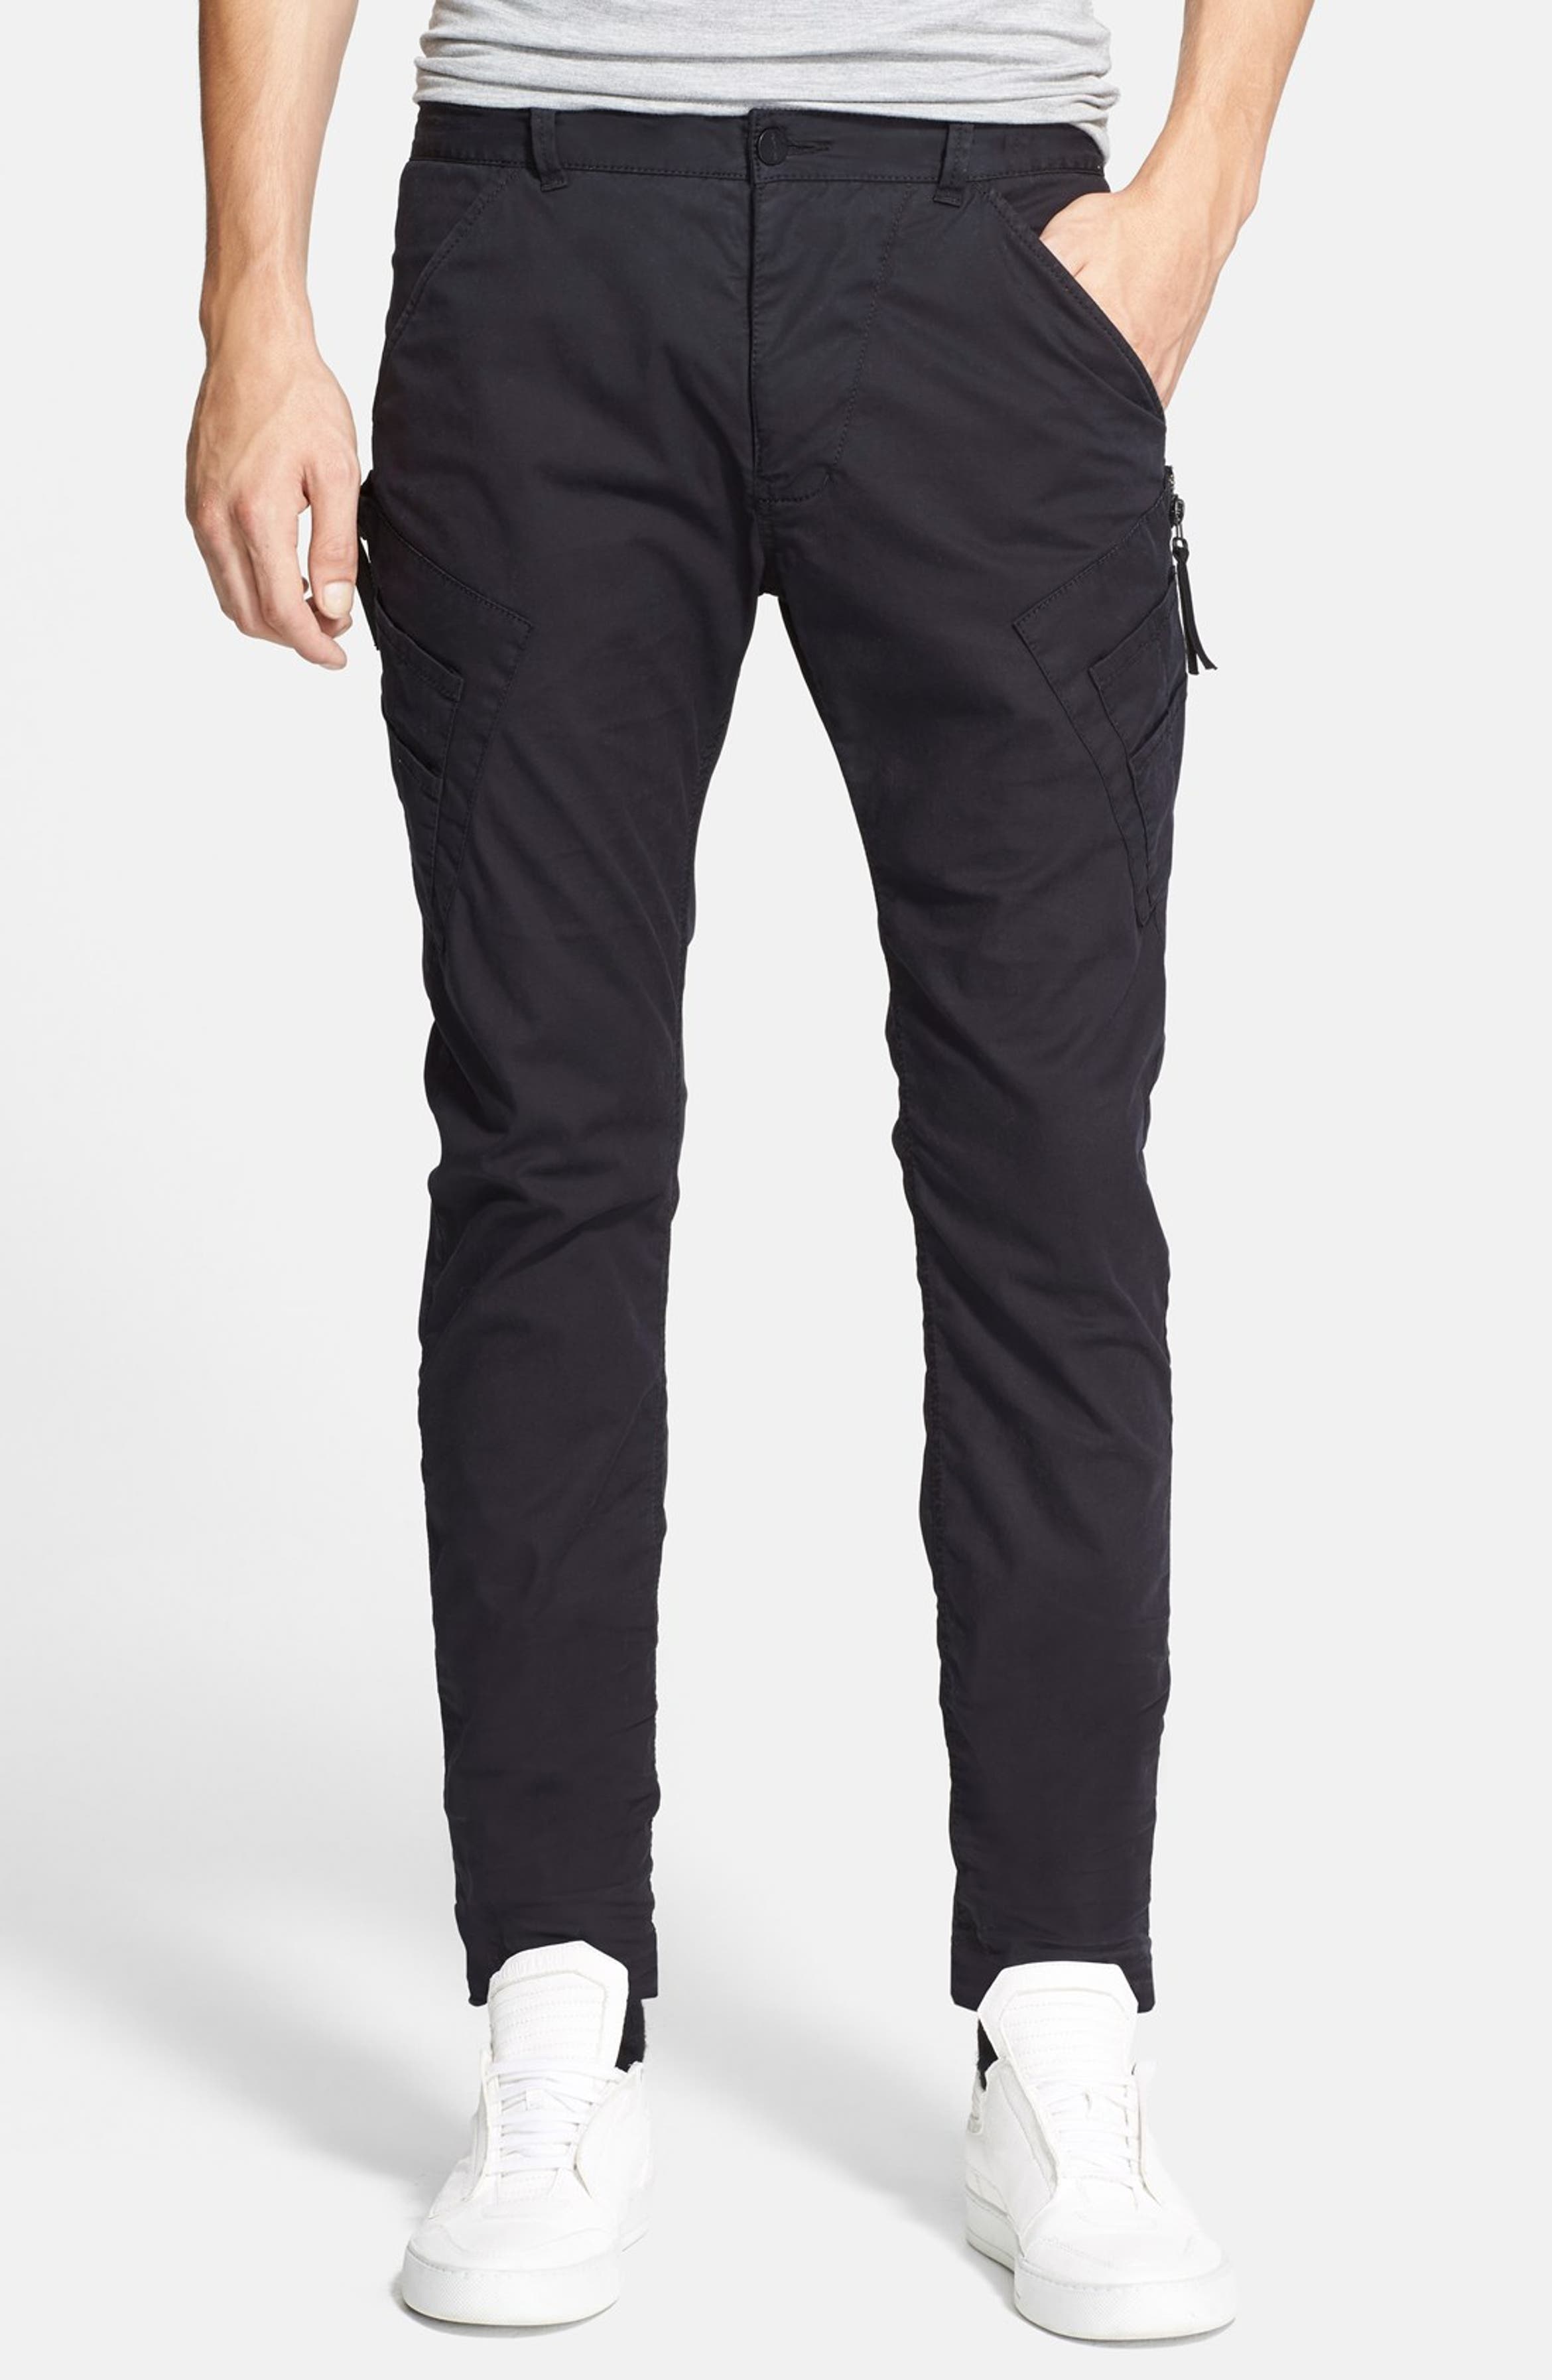 Helmut Lang 'Compact' Chino Cargo Pants | Nordstrom